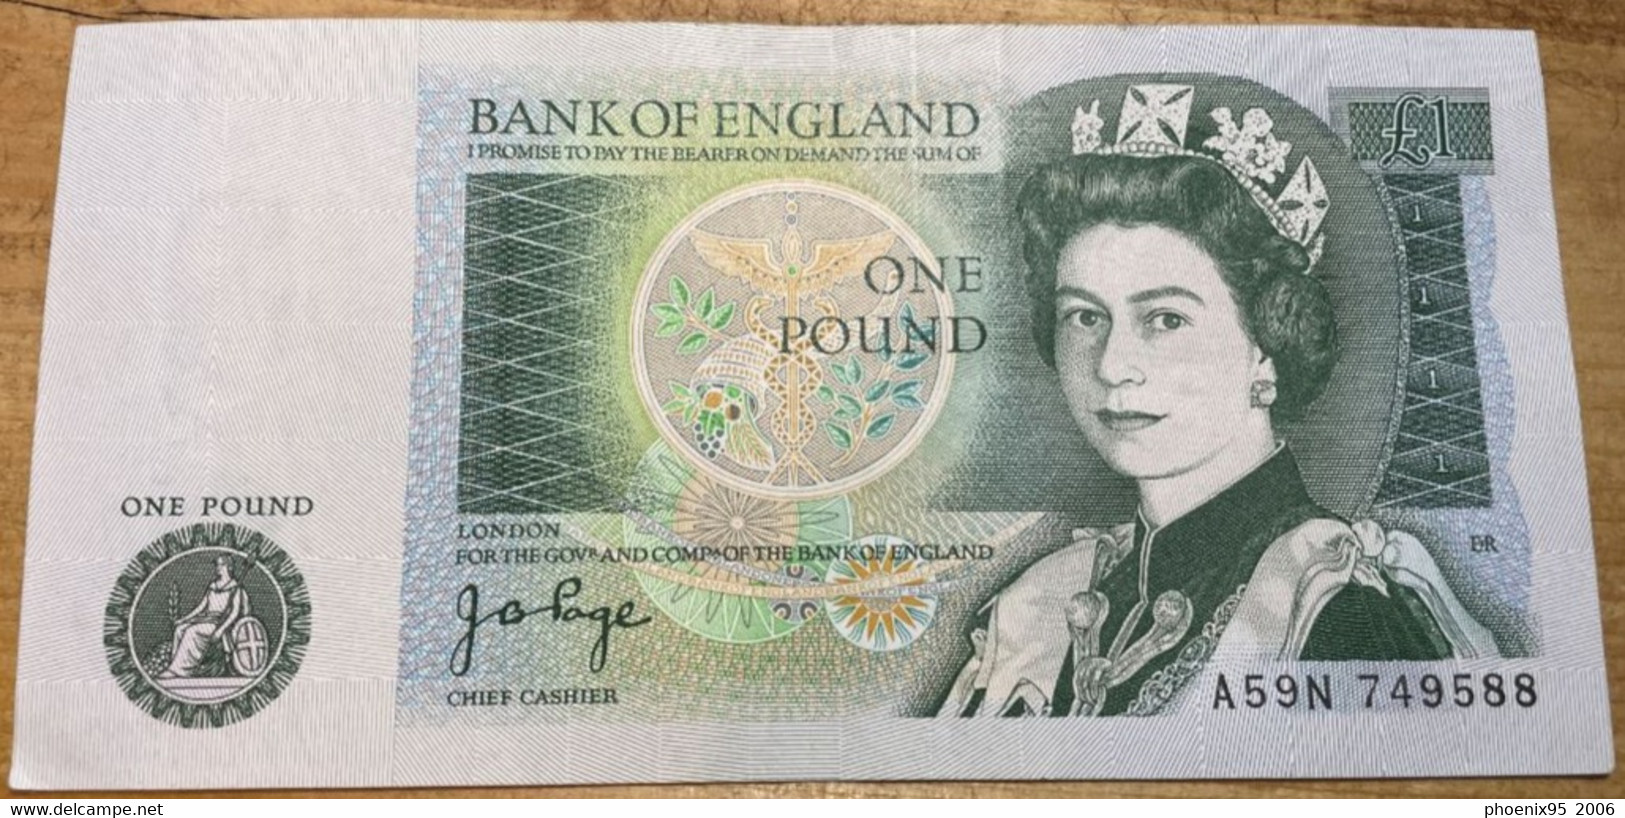 Bank Of England £1 Note (A59N Series, JB Page) - Excellent Condition - 1 Pond